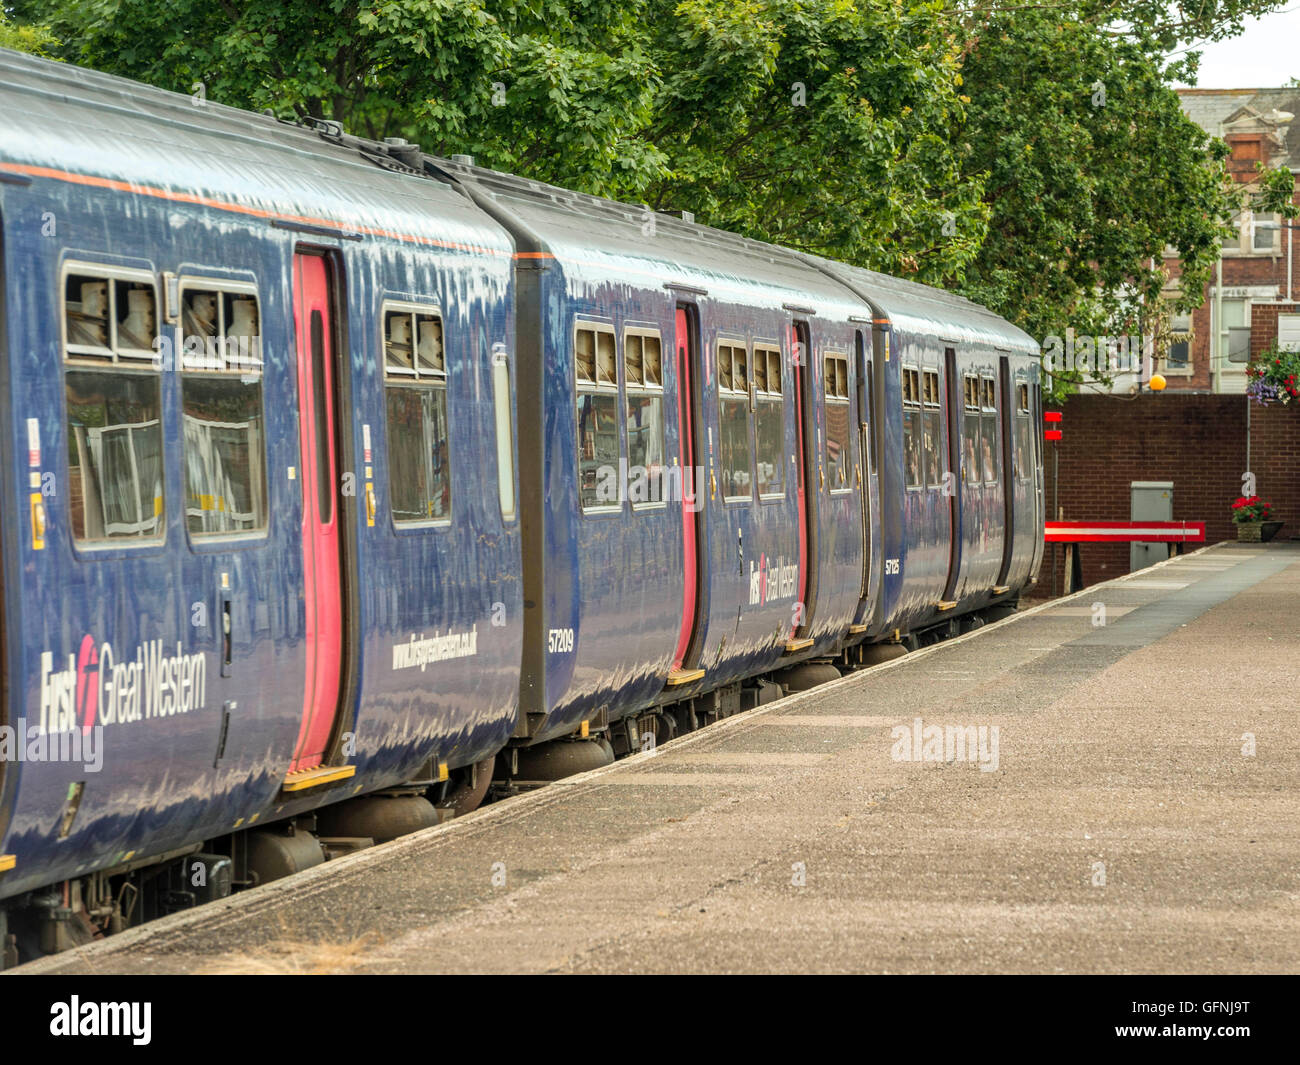 The Great Western Train formed of three carriages leaves Exmouth Station bound for Barnstaple along the picturesque Avocet line. Stock Photo